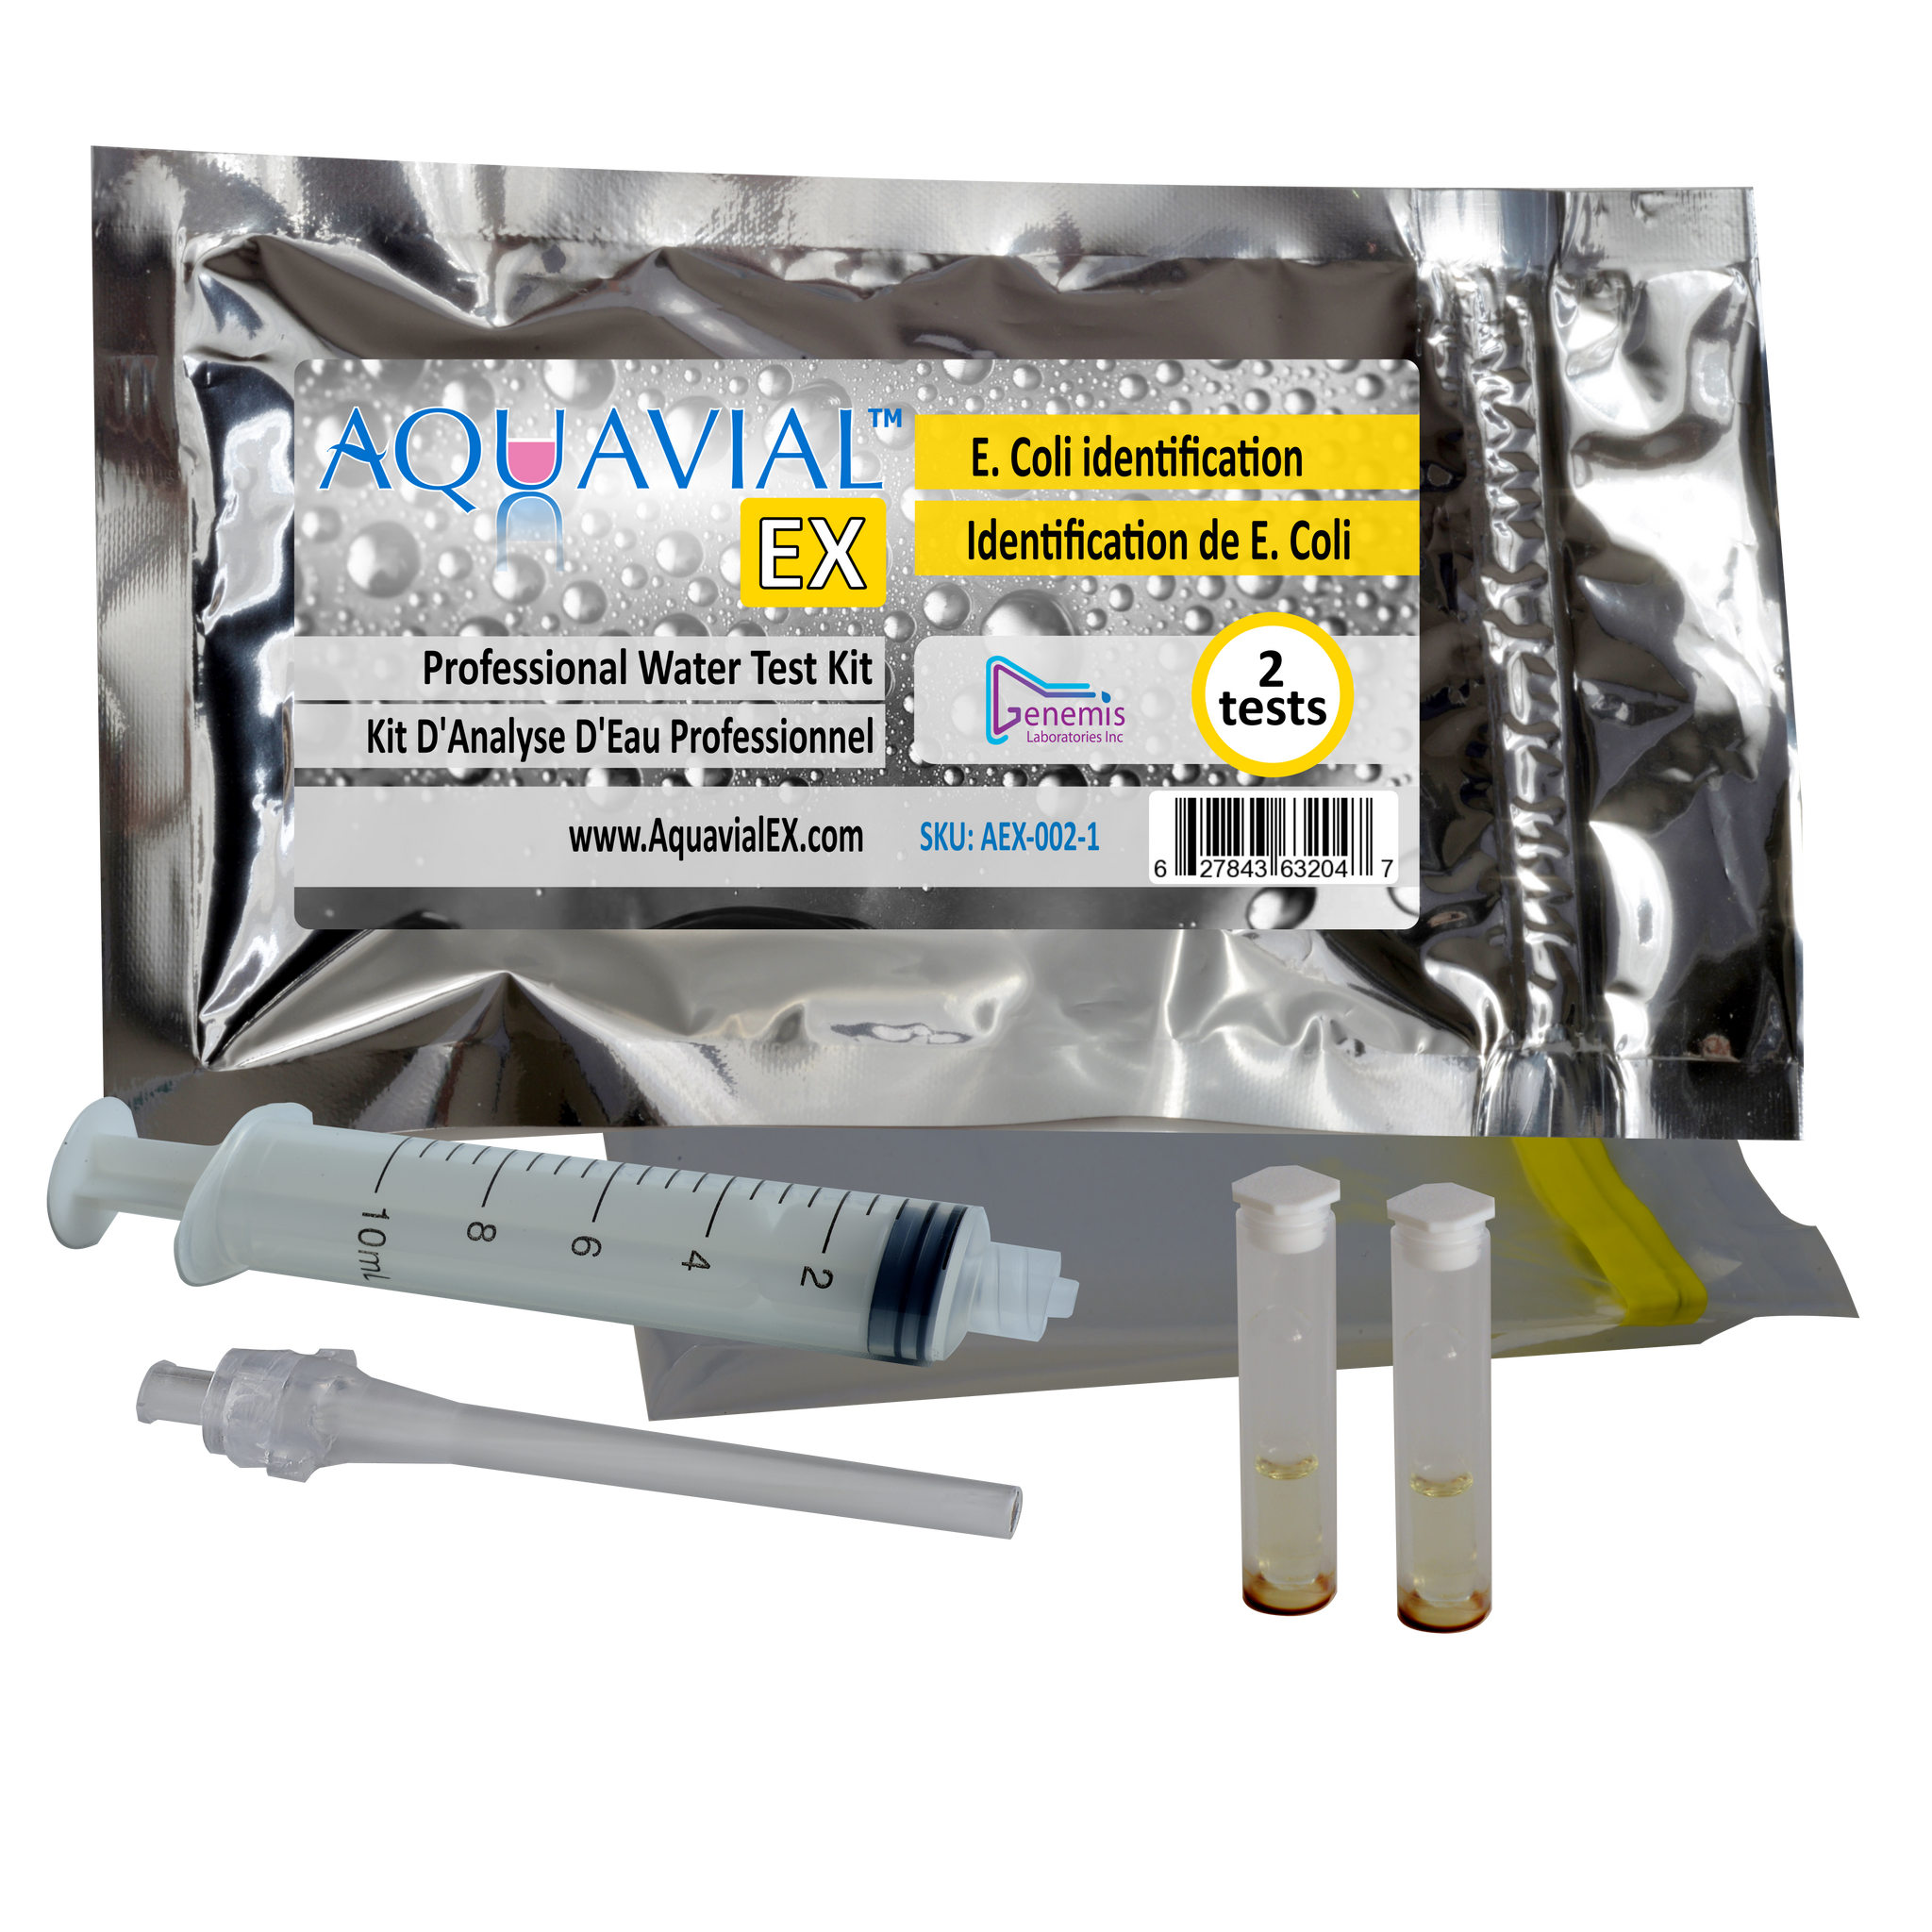 AquaVial EX - 7 Hours E. coli Detection and Identification Professional Water Test Kit